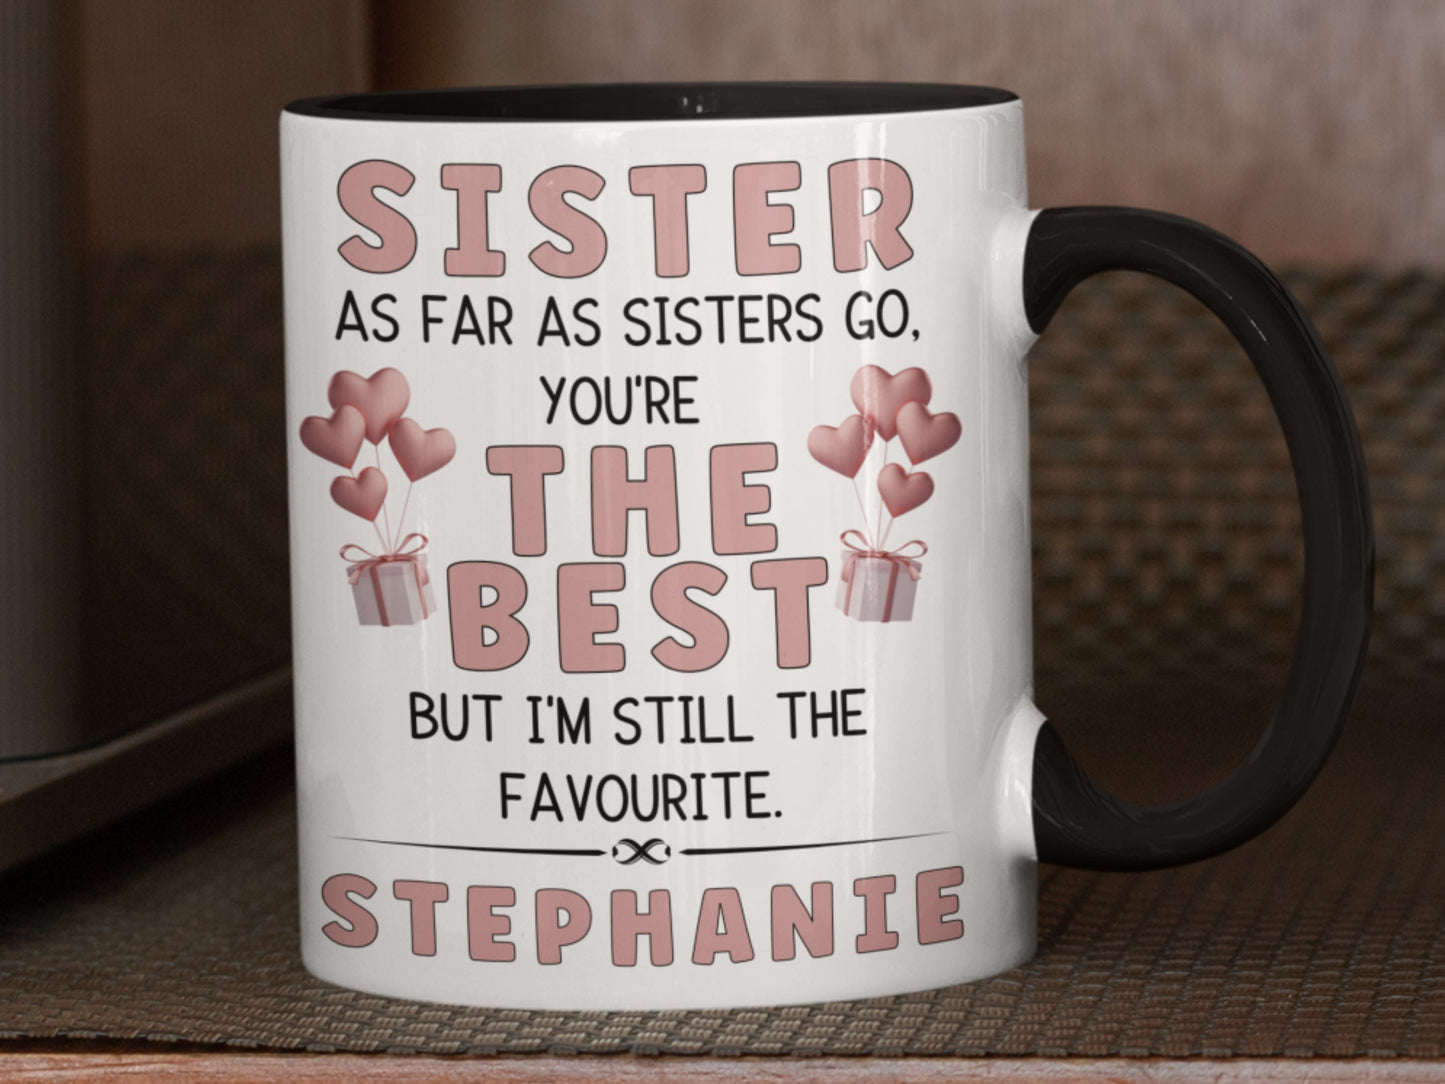 You're the best sister but I'm the favourite funny personalised mug